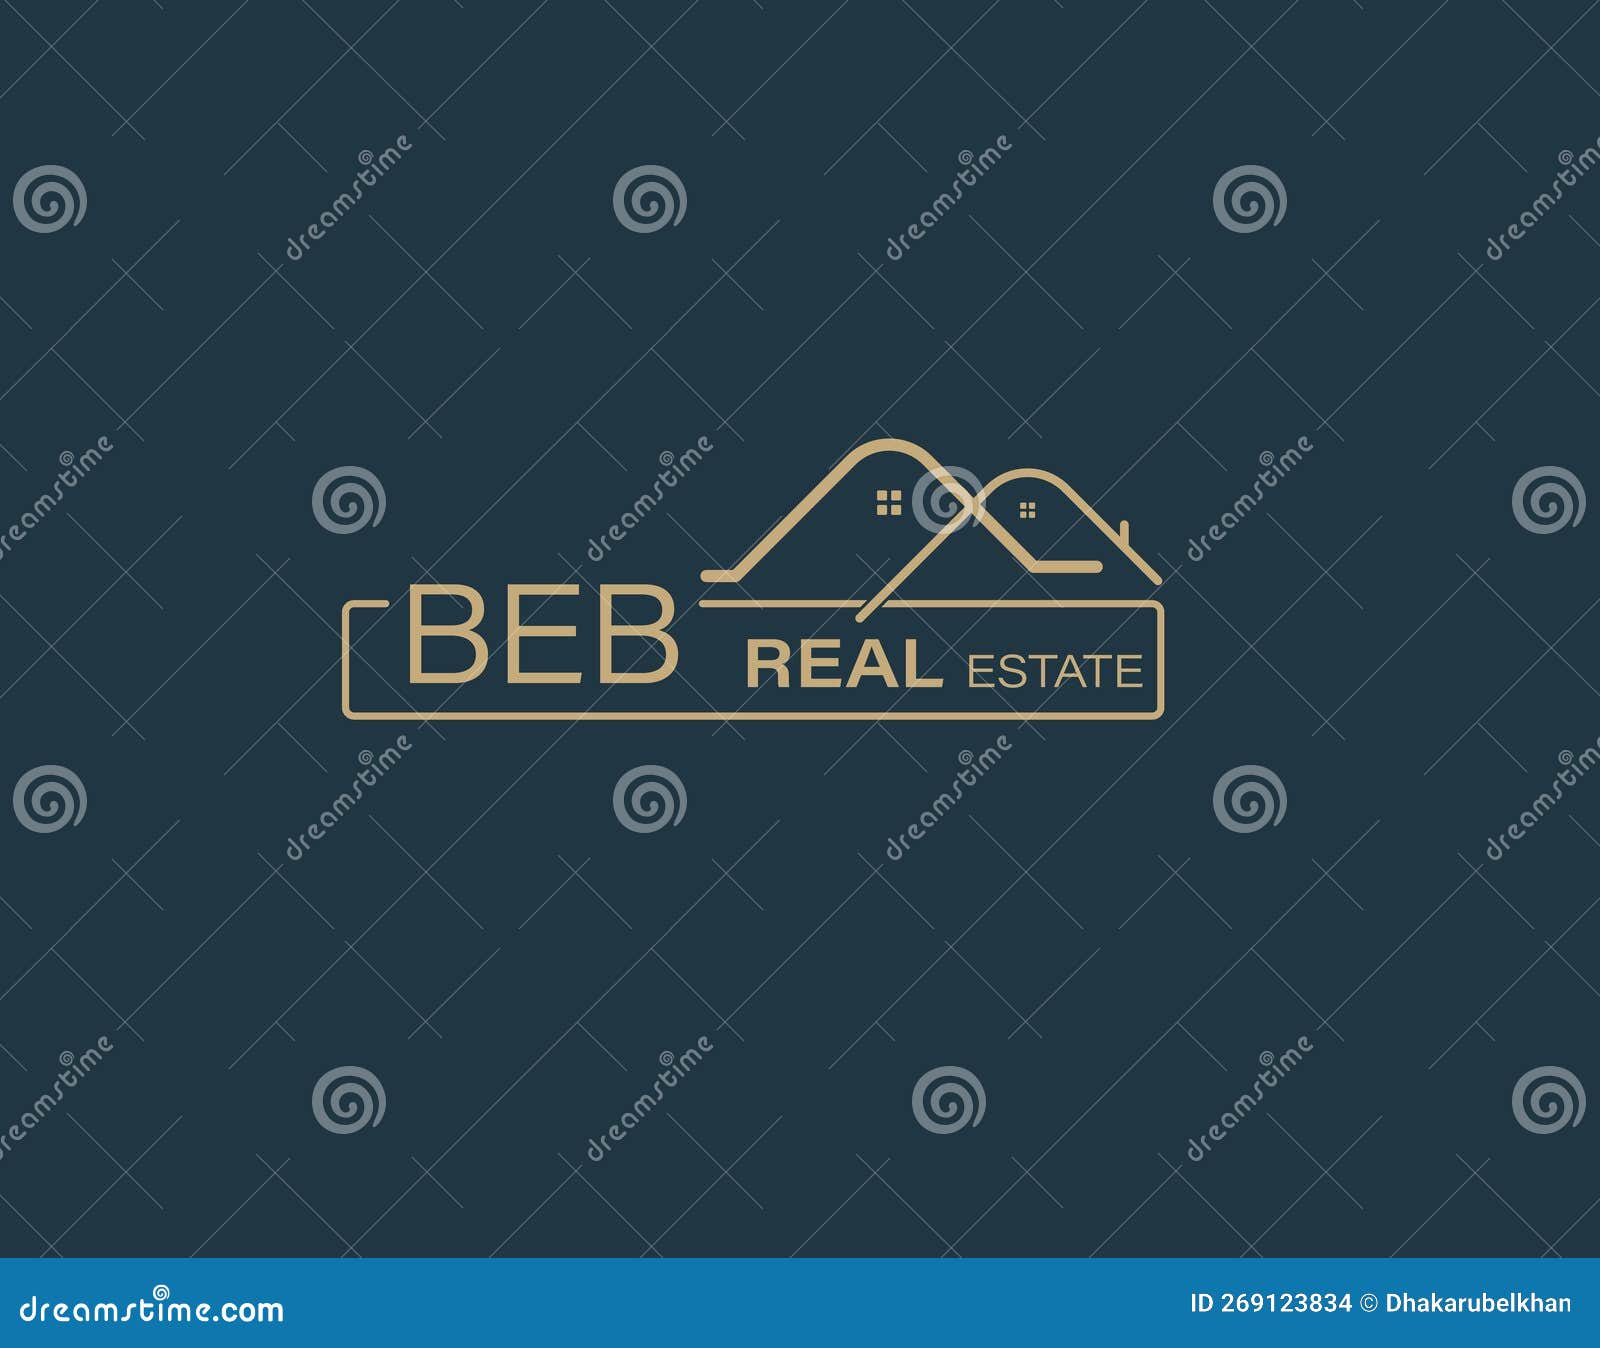 beb real estate and consultants logo  s images. luxury real estate logo 